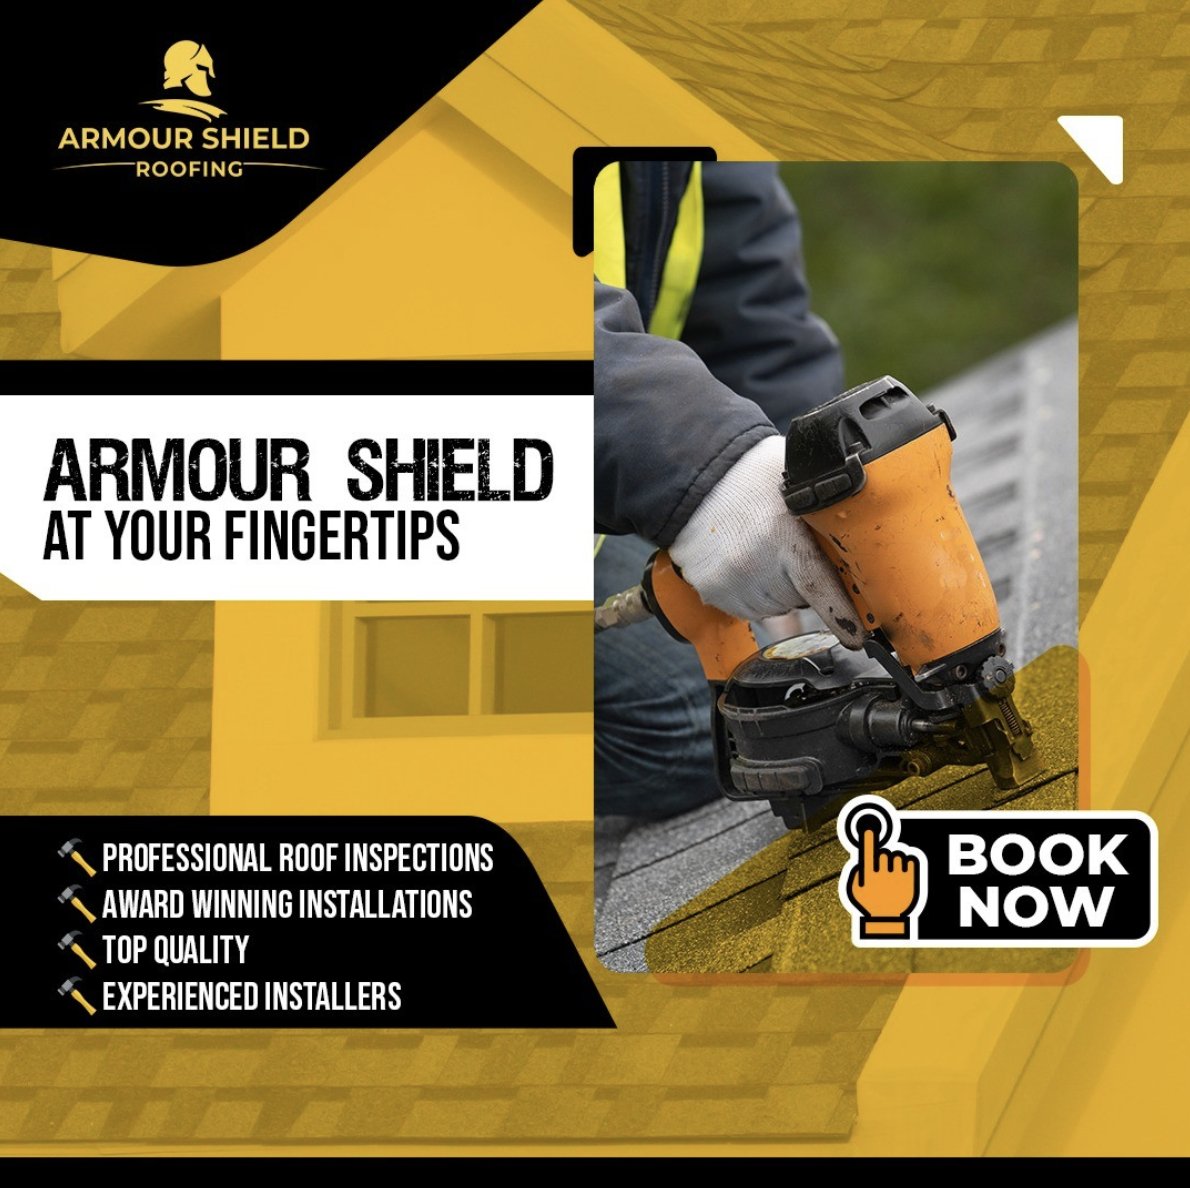 Reliable roofing services available right at your fingertips!🏠🔨 Call us or visit our website to book your free no-obligation roofing estimate! London ☎️ 519-858-5044 GTA ☎️ 289-628-3211 💻 armourshield.ca #roofing #contractors #london #Toronto #Mississauga #Oakville